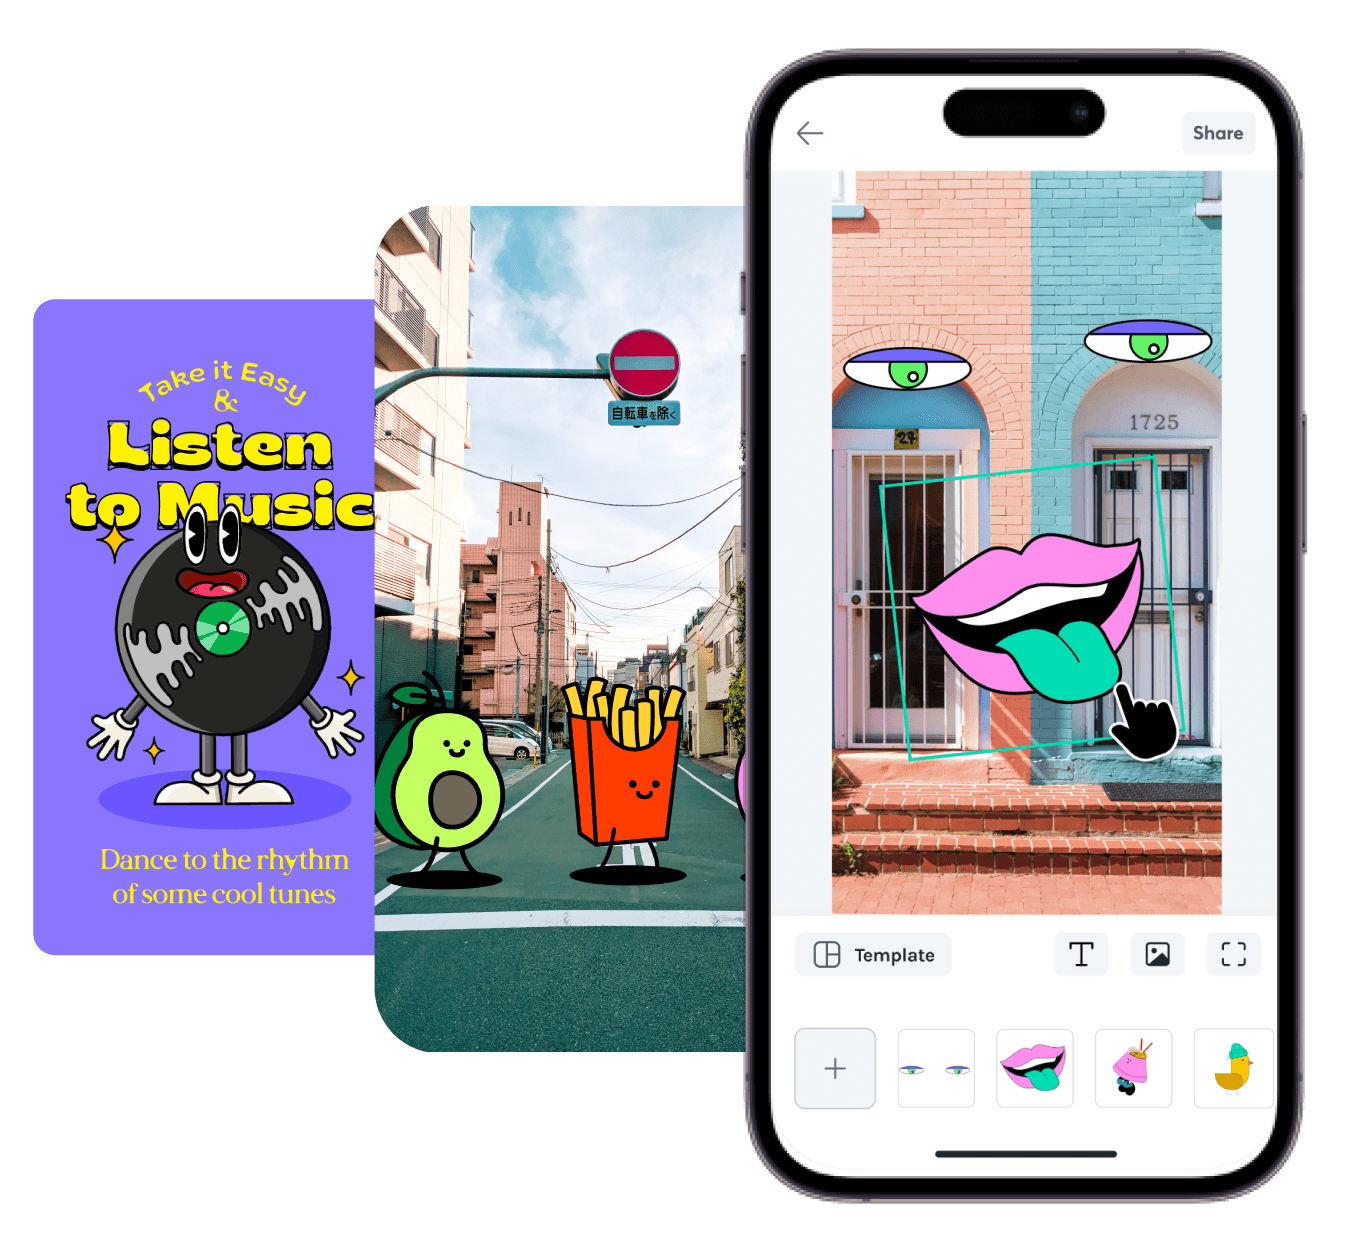 Motion editor, templates and stickers on the LottieFiles mobile app